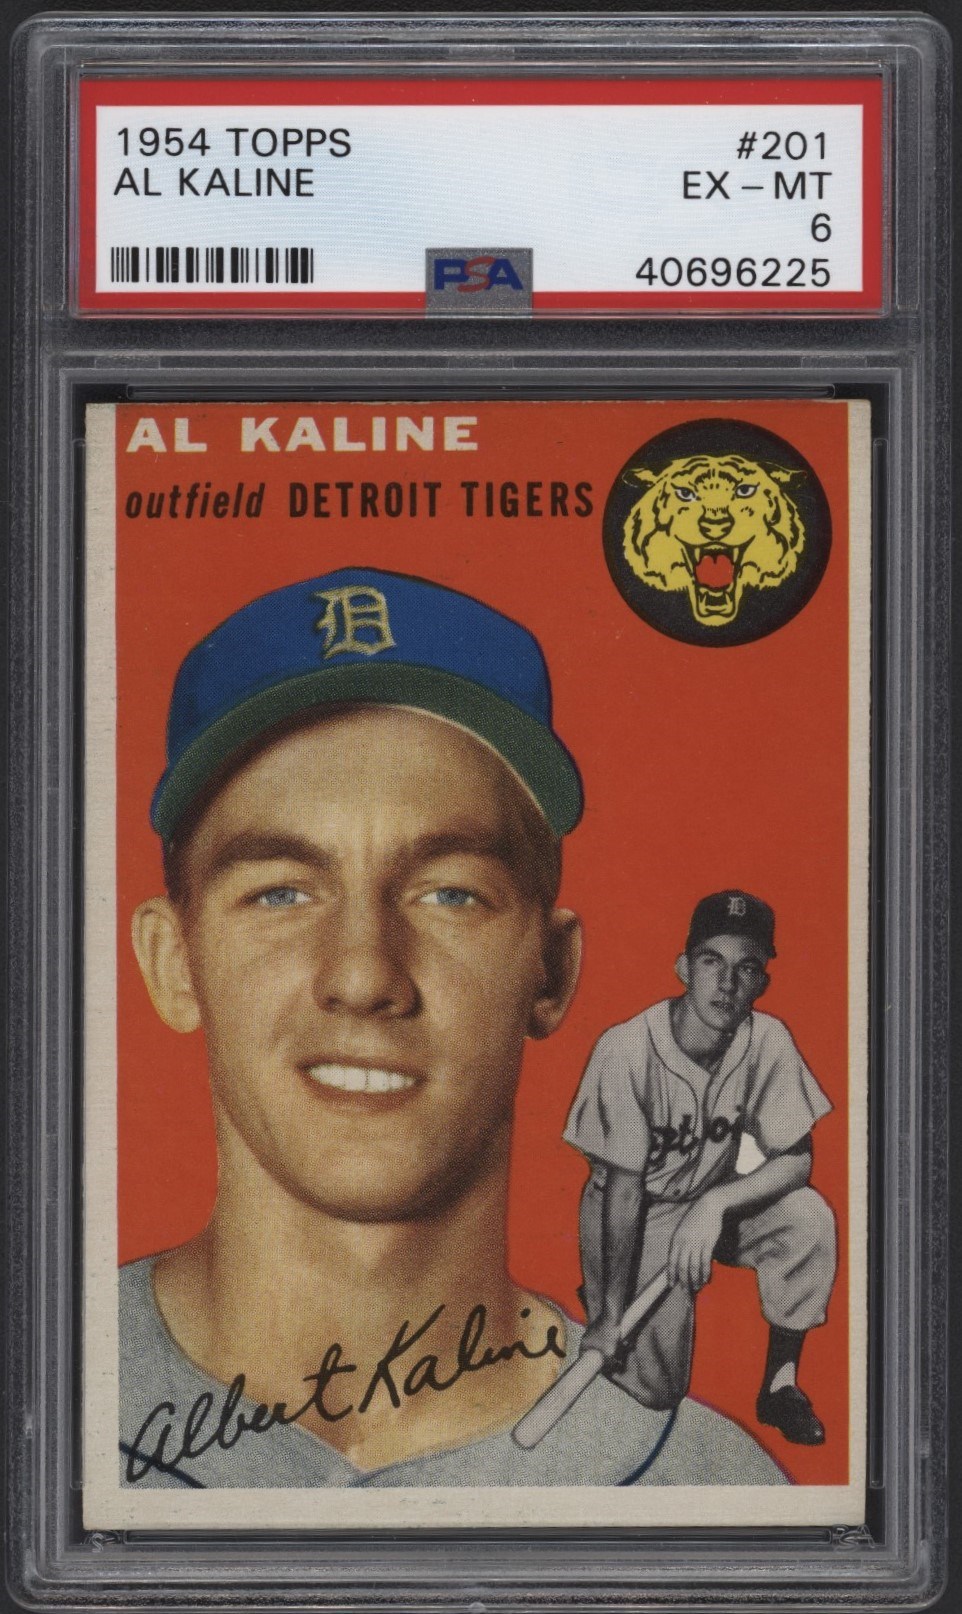 Baseball and Trading Cards - 1954 Topps #201 Al Kaline Rookie Card - PSA EX-MT 6